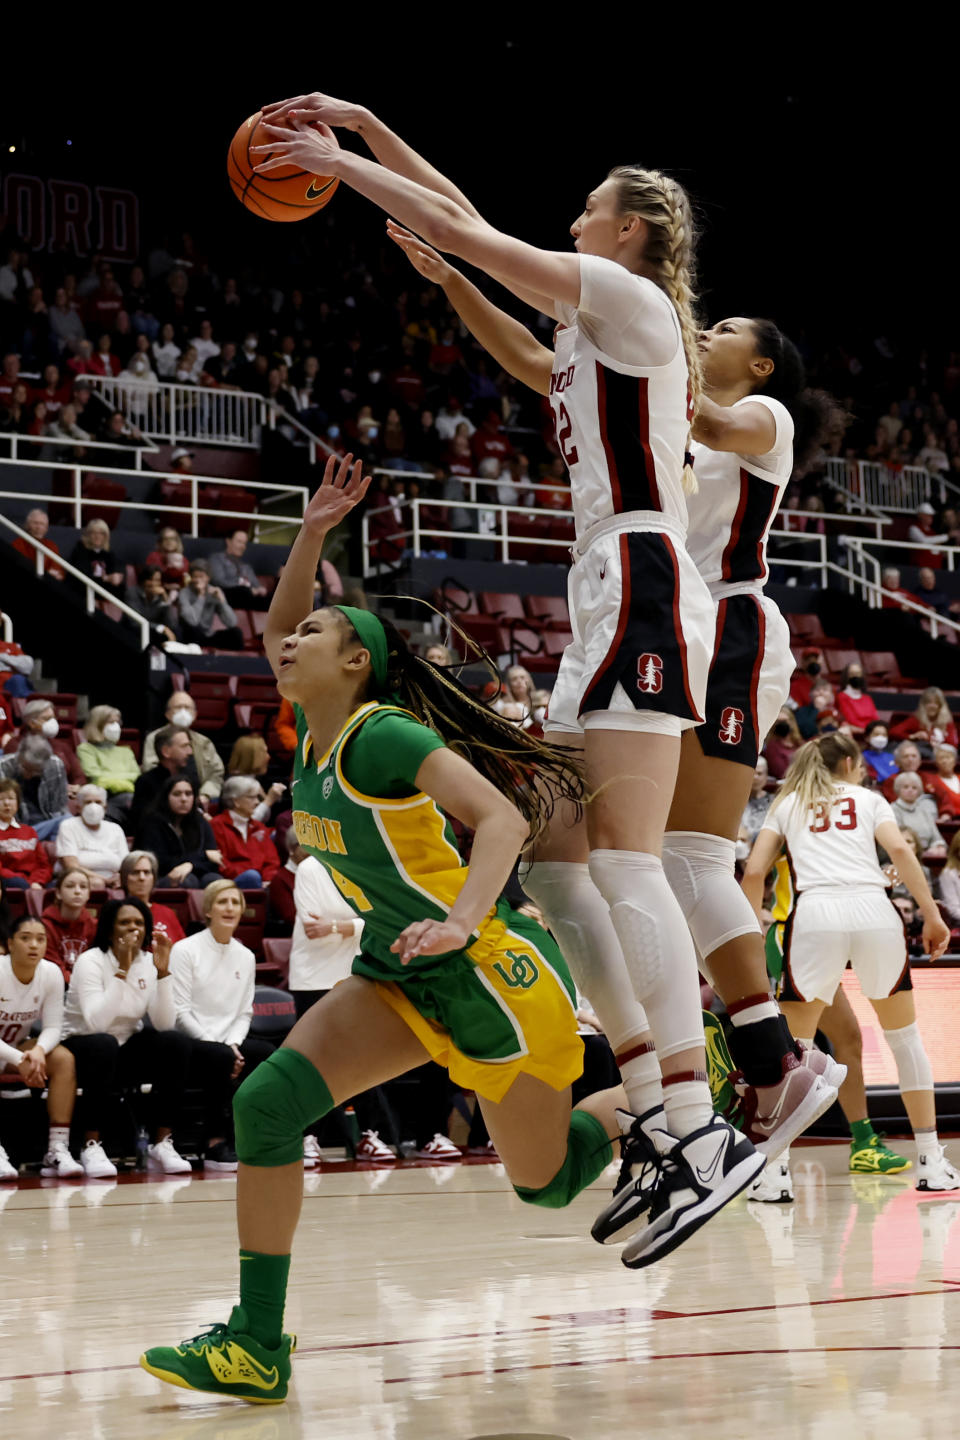 Stanford forward Cameron Brink, front right, blocks a shot by Oregon guard Endyia Rogers, left, during the first half of an NCAA college basketball game Sunday, Jan. 29, 2023, in Stanford, Calif. (AP Photo/Josie Lepe)